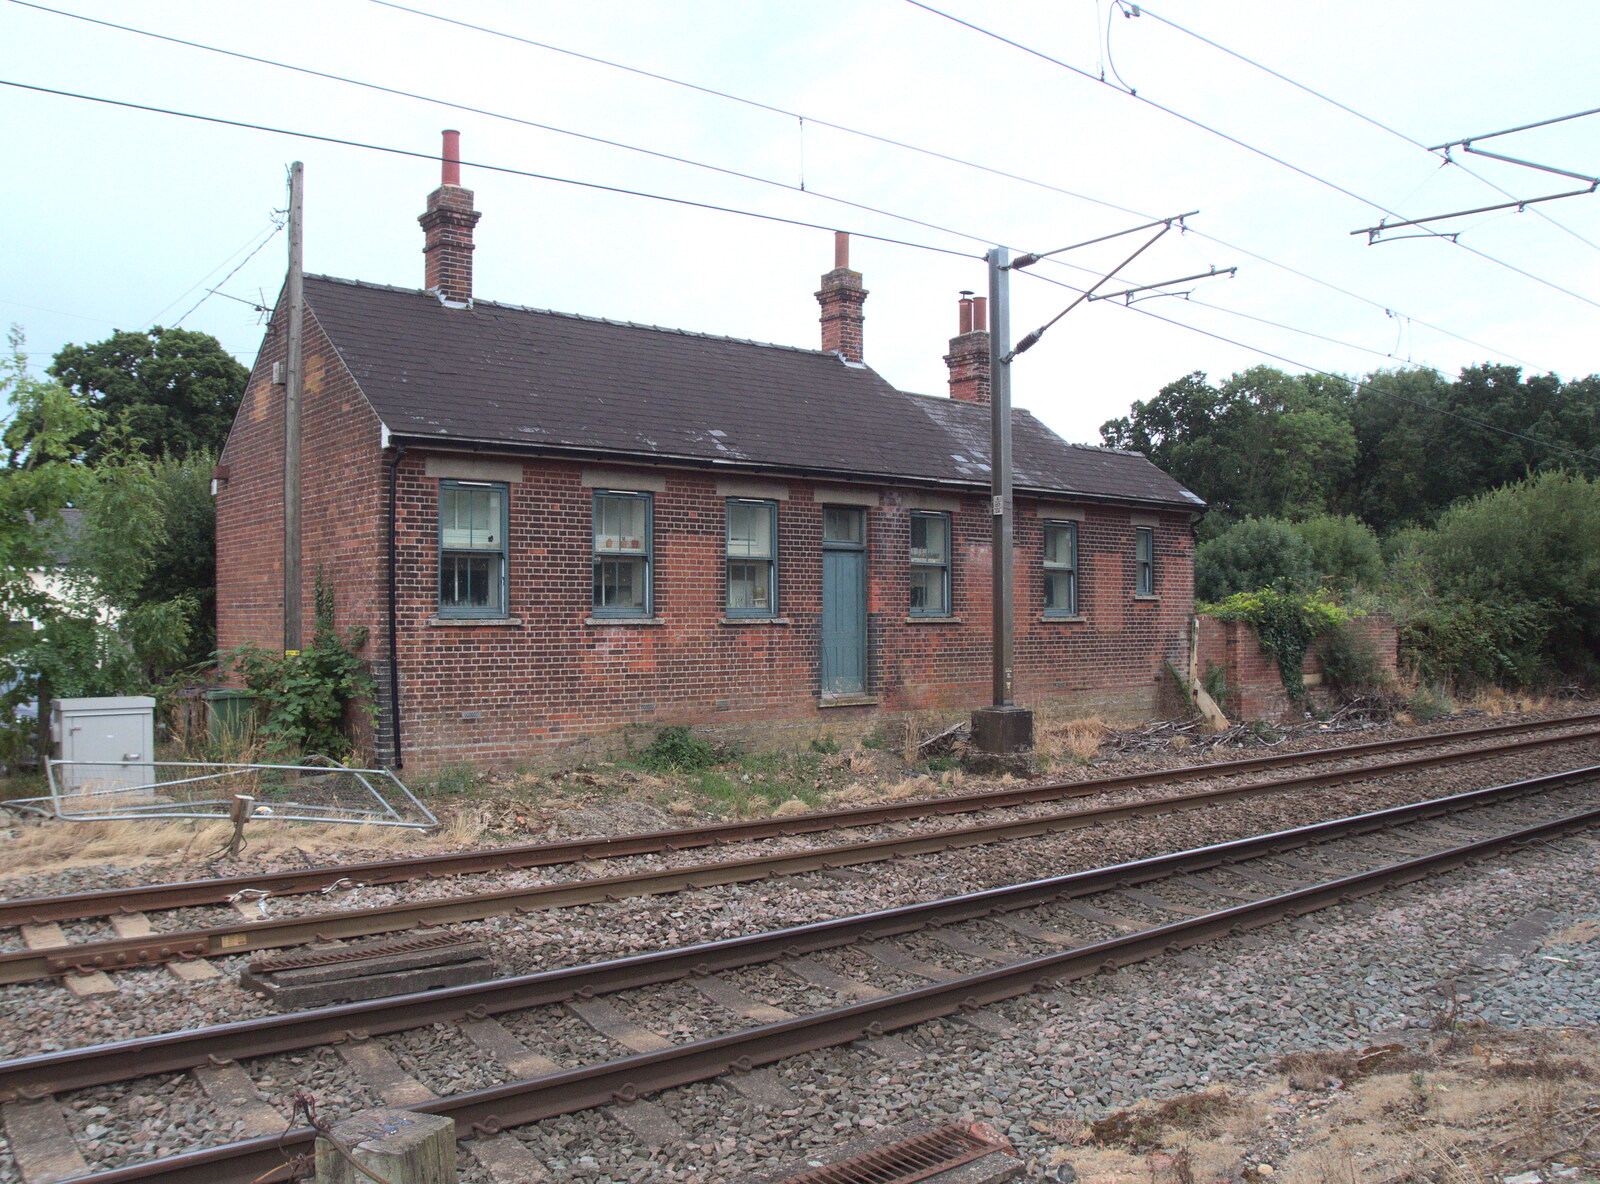 The Eye Piggy Tail Trail and Ipswich Dereliction, Suffolk - 29th July 2022: Old railway buildings between Shimpling and Burston